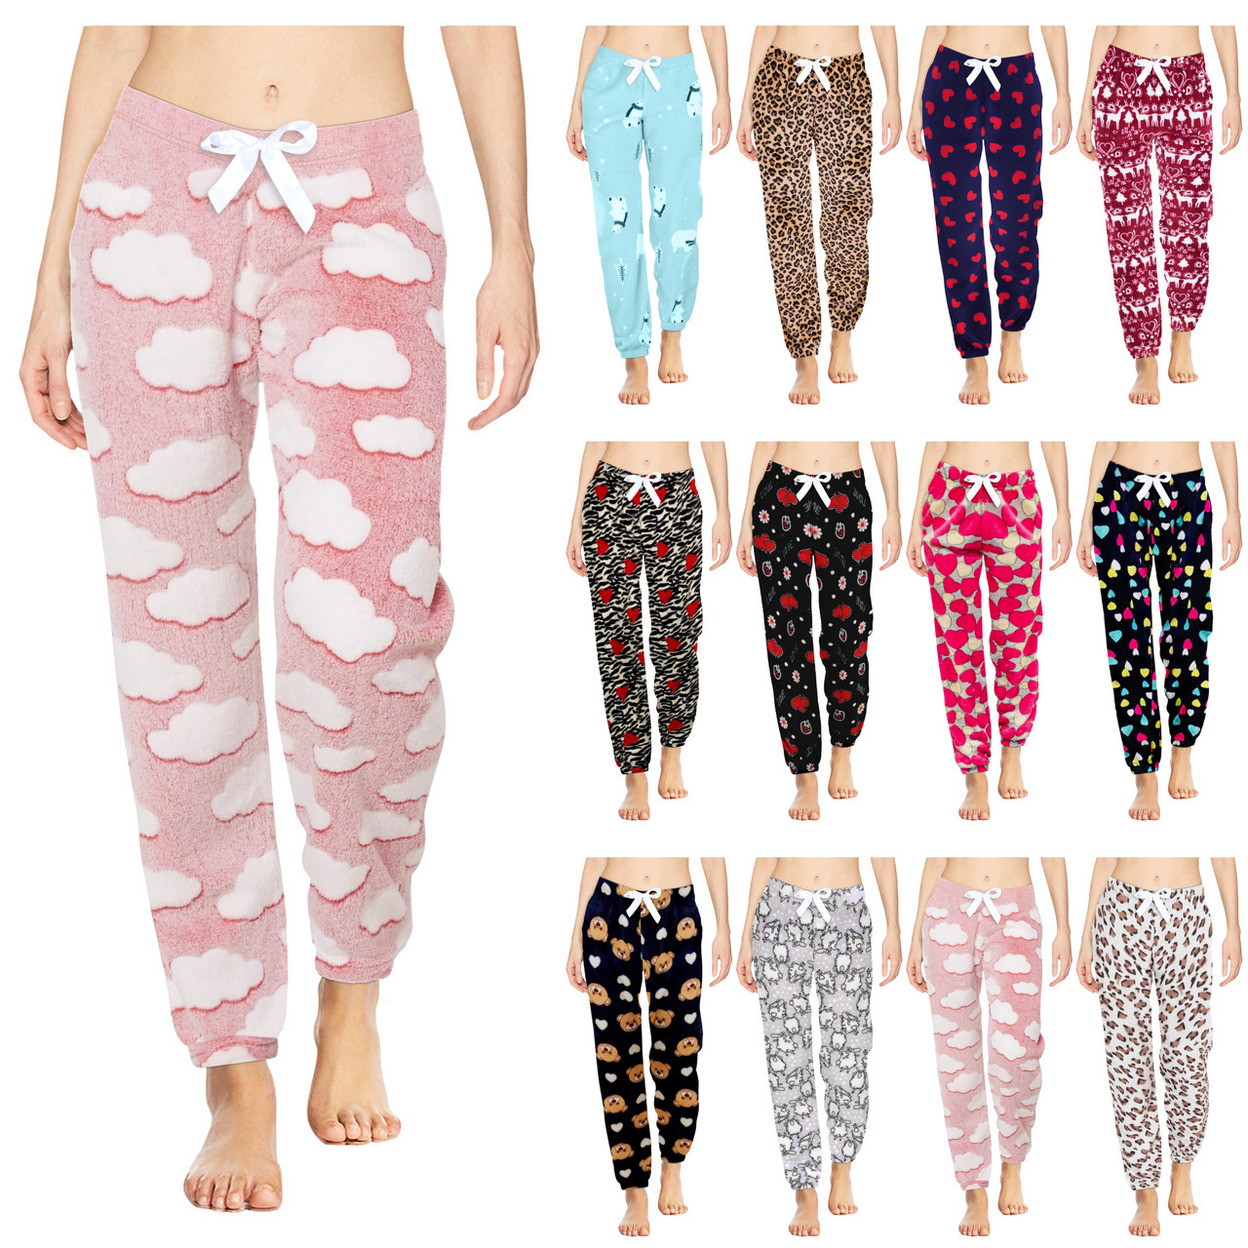 Multi-Pack: Women's Printed Ultra-Soft Comfy Stretch Micro-Fleece Pajama Lounge Pants - 3-pack, Love, Xx-large